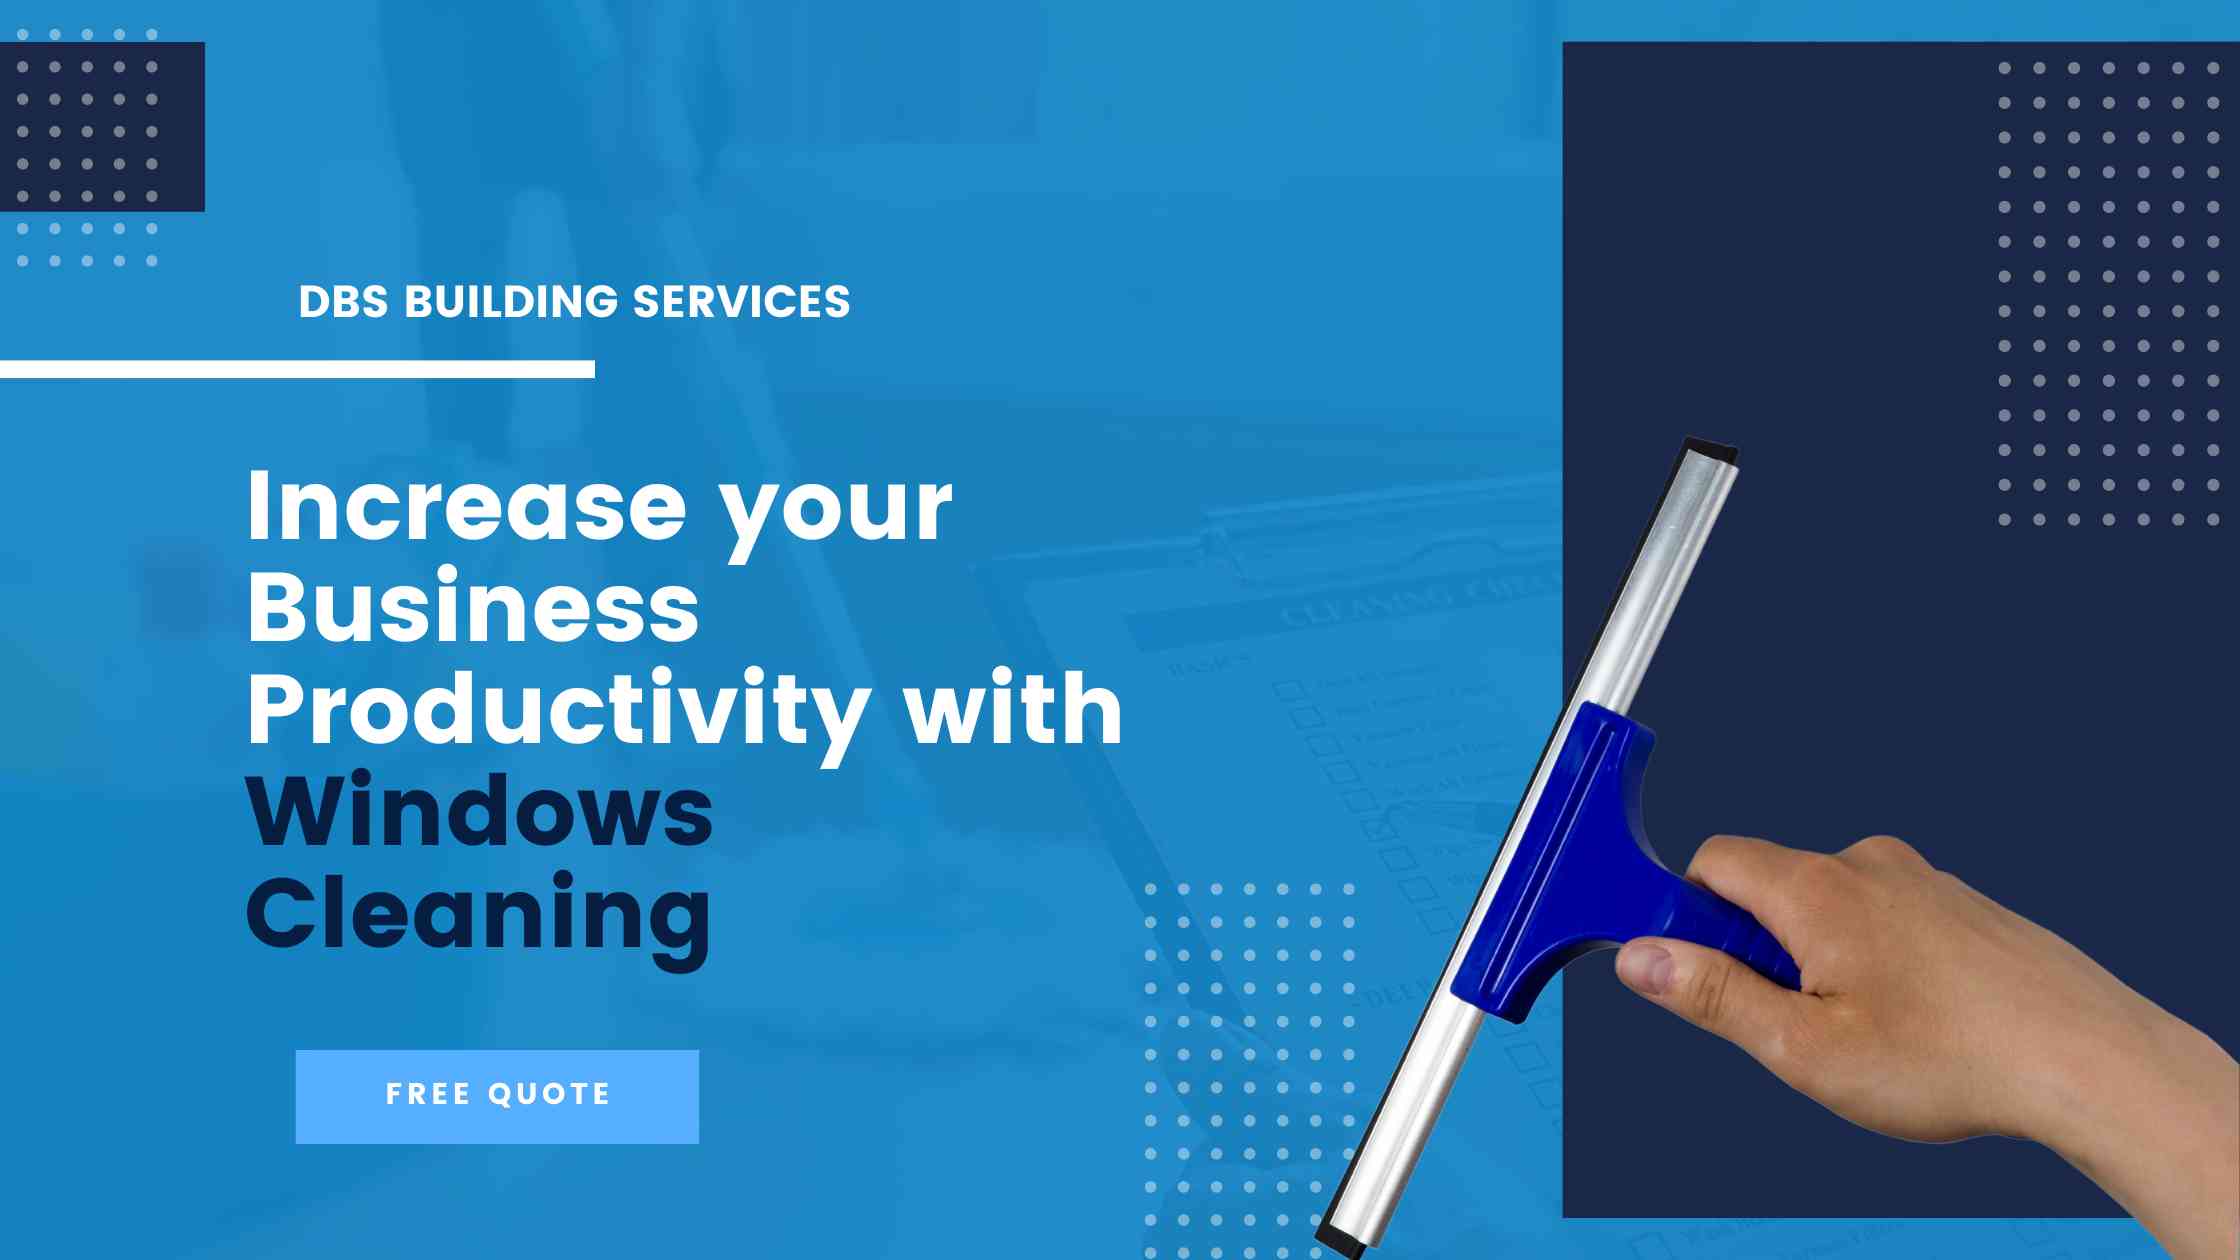 Business Productivity with Windows Cleaning